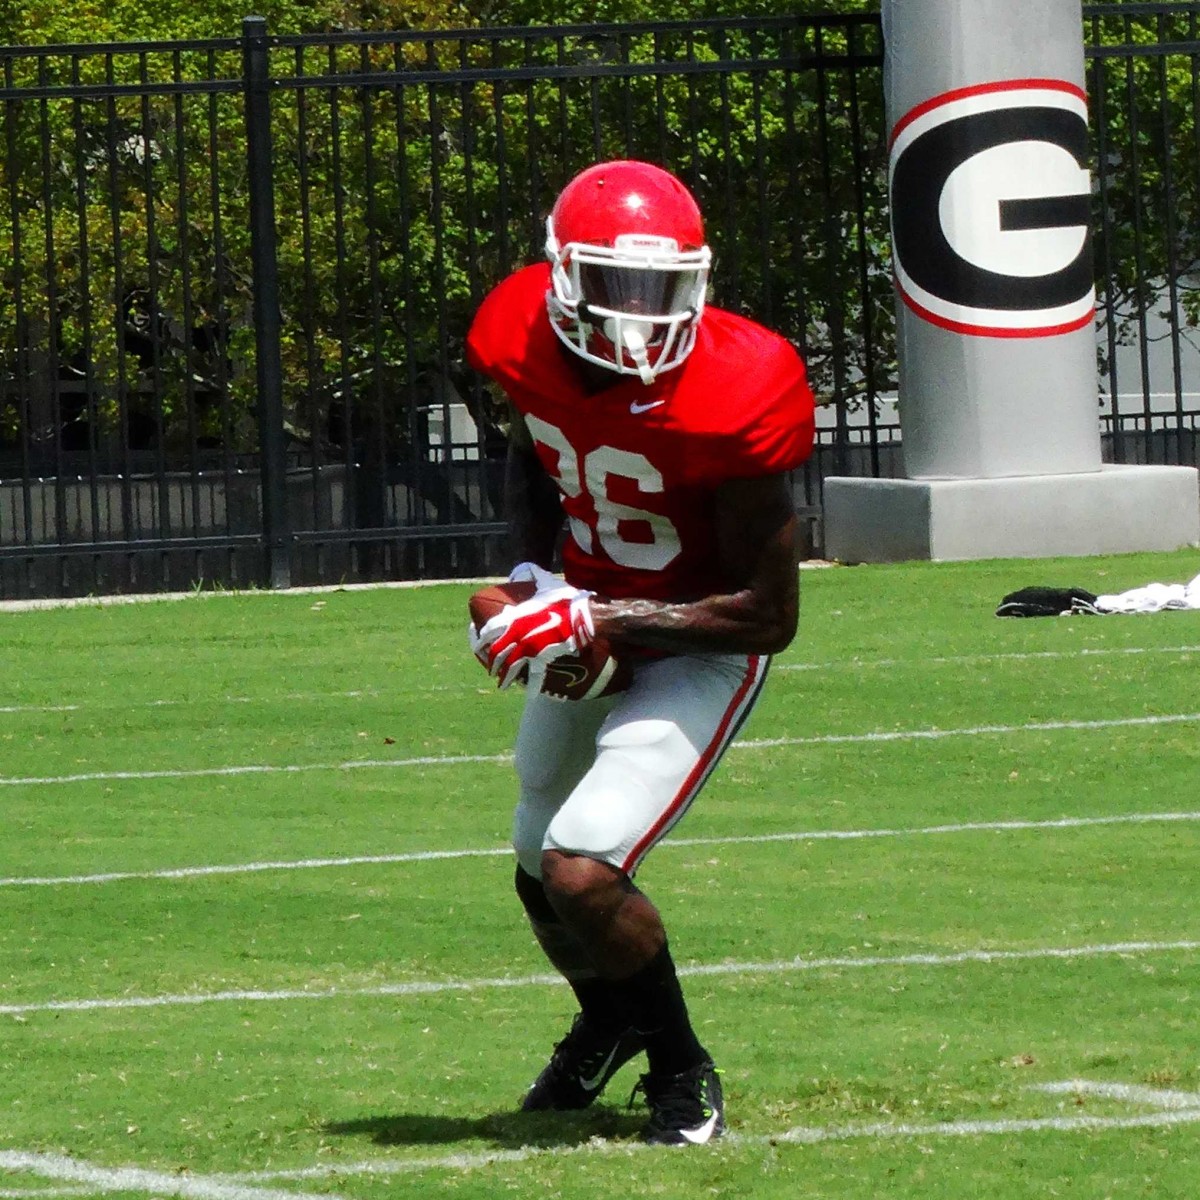 Malcolm Mitchell catches pass during wide receiver drill